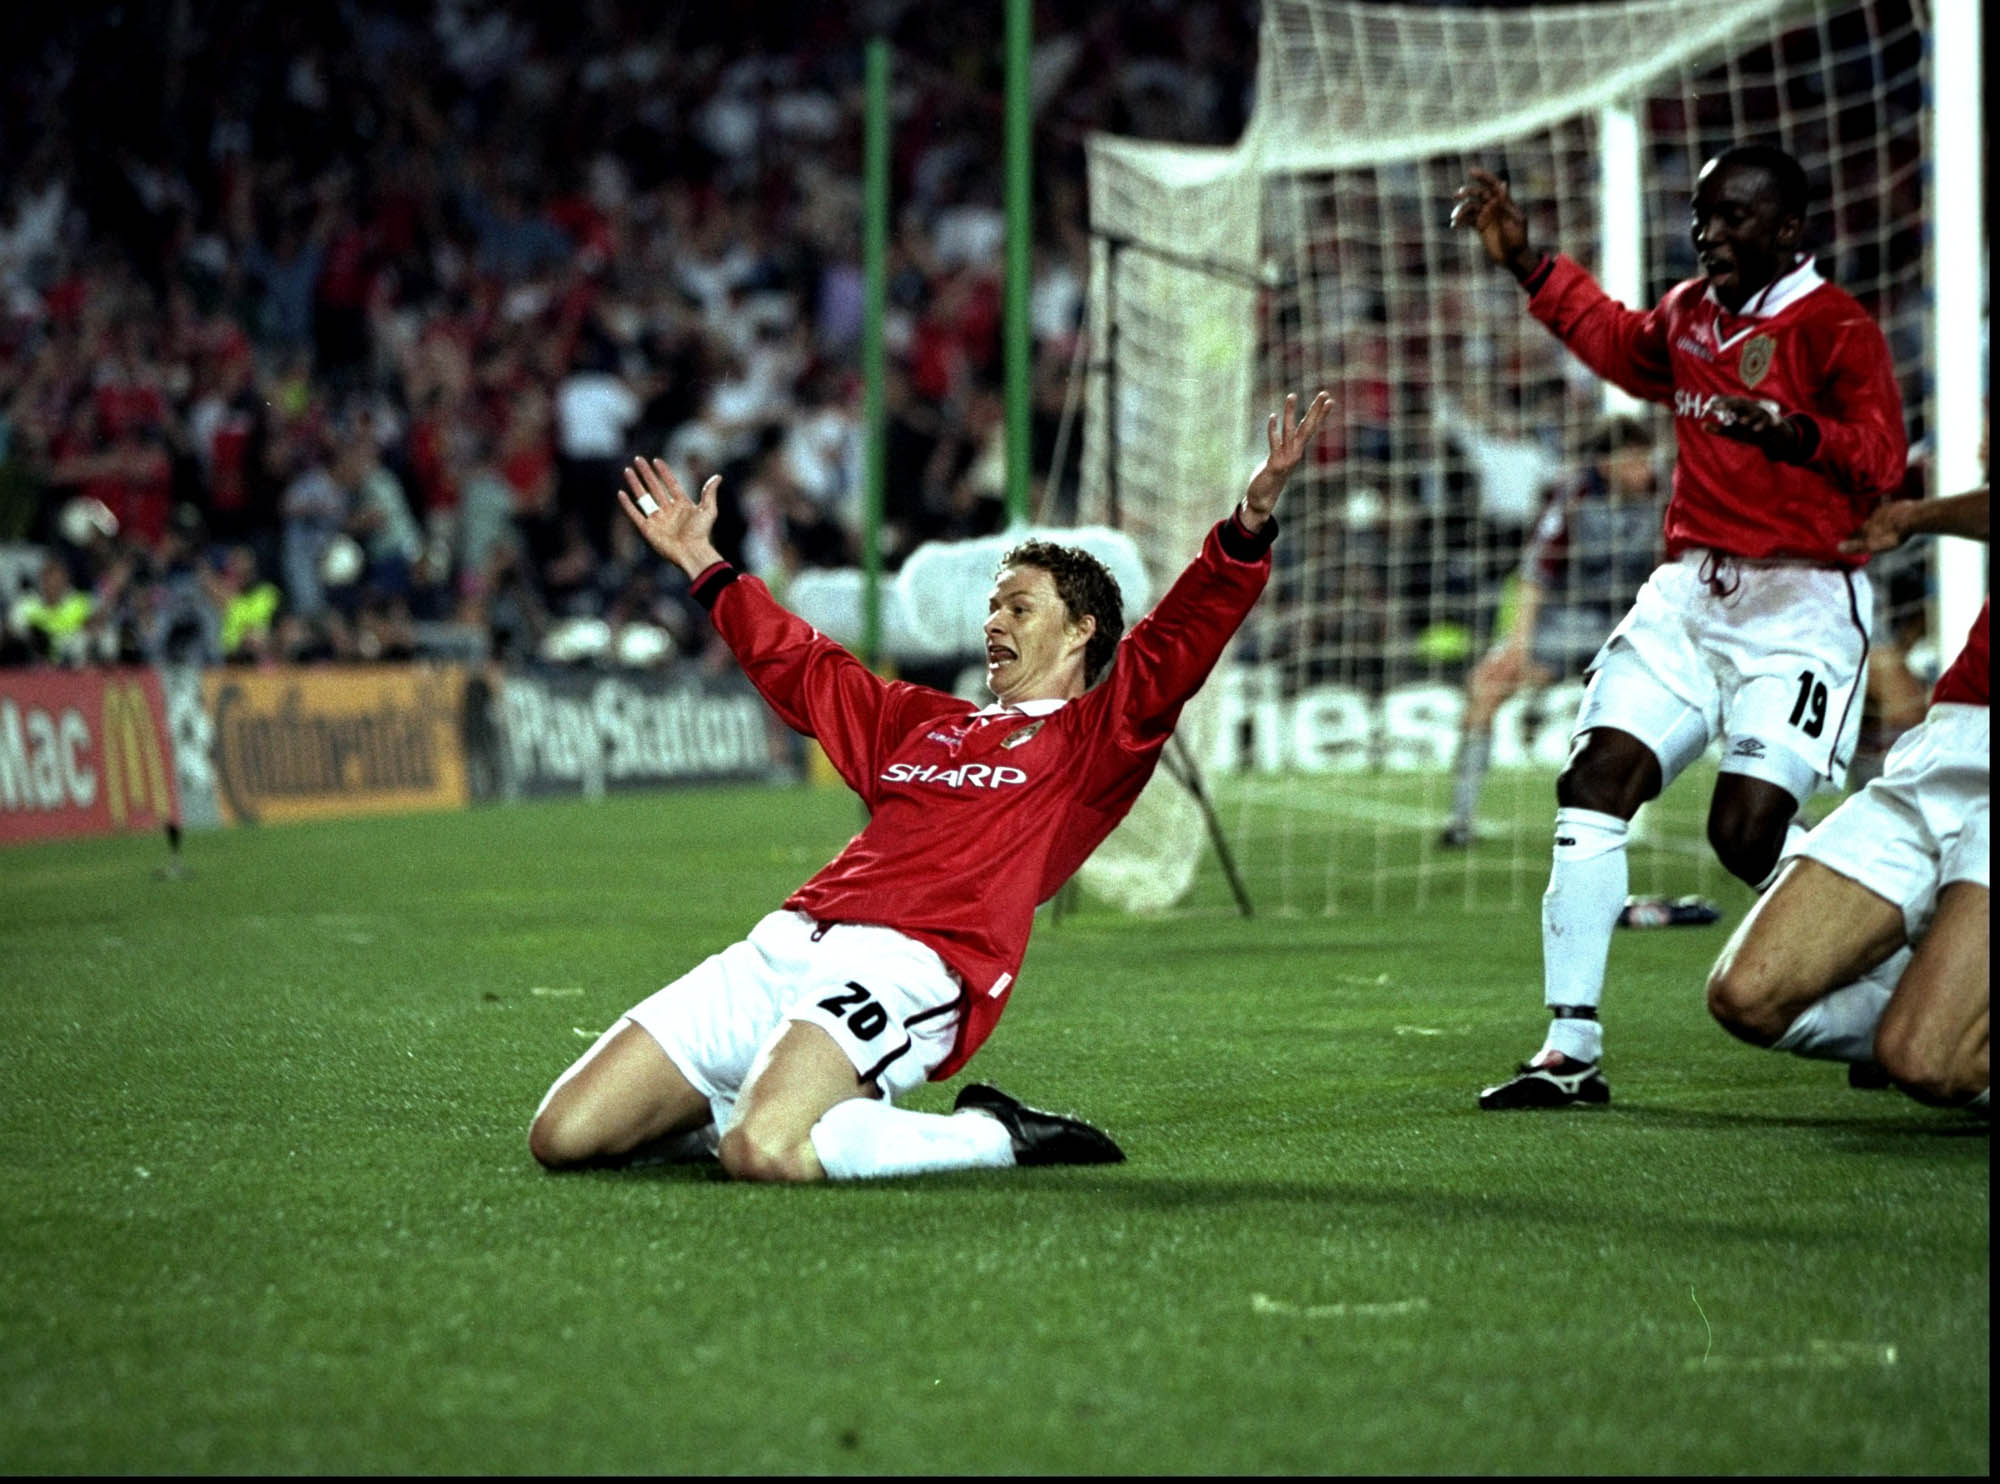 Ole Gunnar Solskjaer celebrates scoring the second goal for Manchester United during the European Champions League Final against Bayern Munich in the Nou Camp Stadium, Barcelona, Spain. Manchester United won 2 - 1 with both United goals scored during injury time, to secure the treble of League, FA Cup and European Cup.